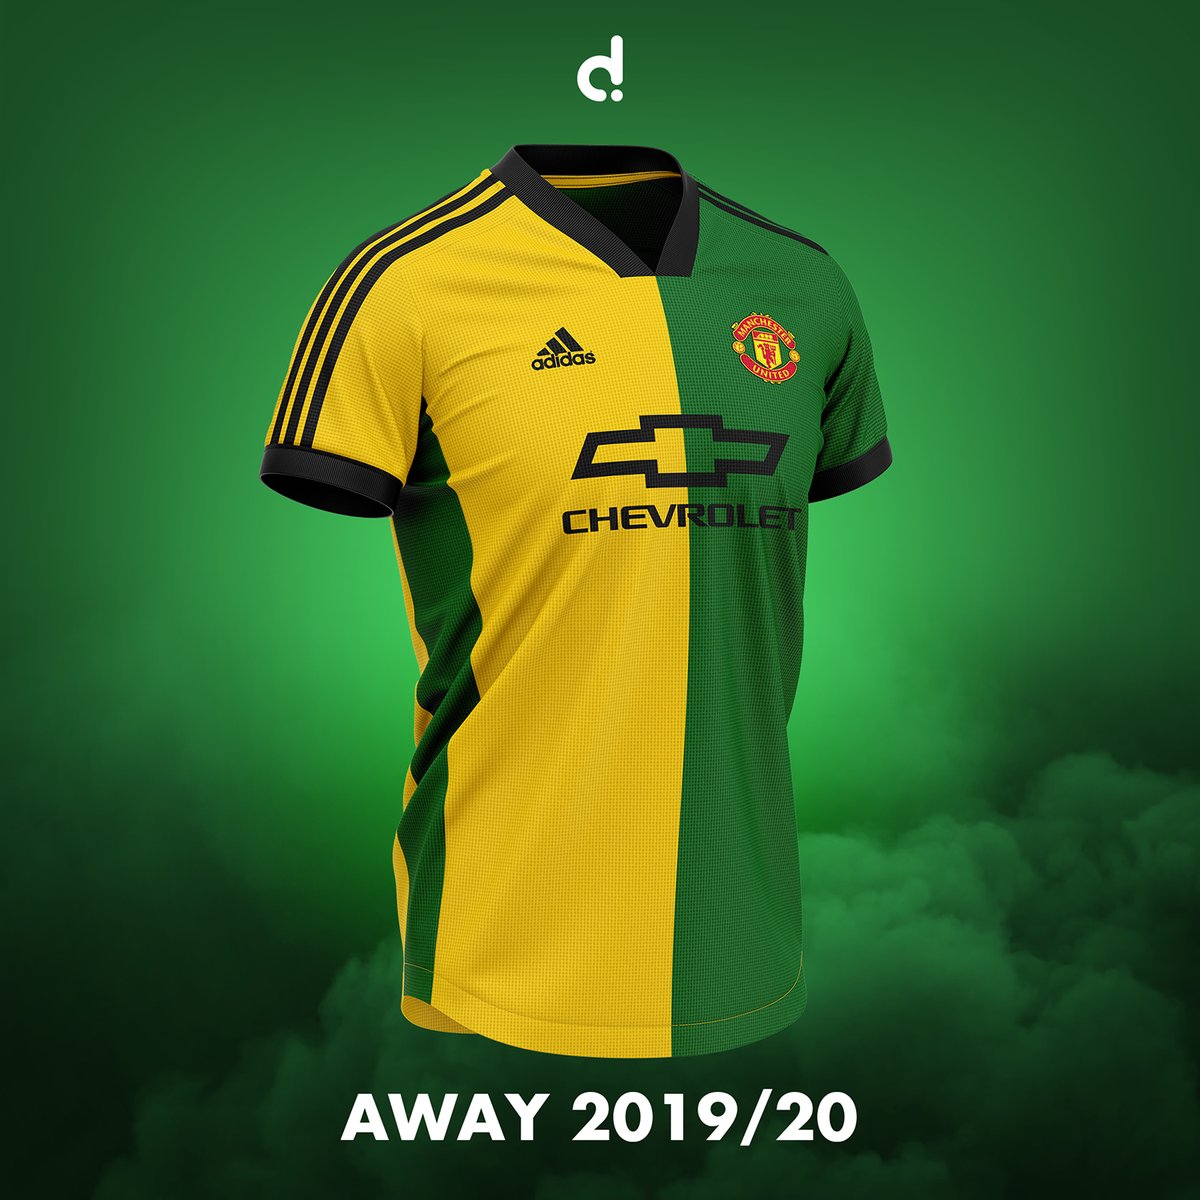 manchester united green and yellow jersey